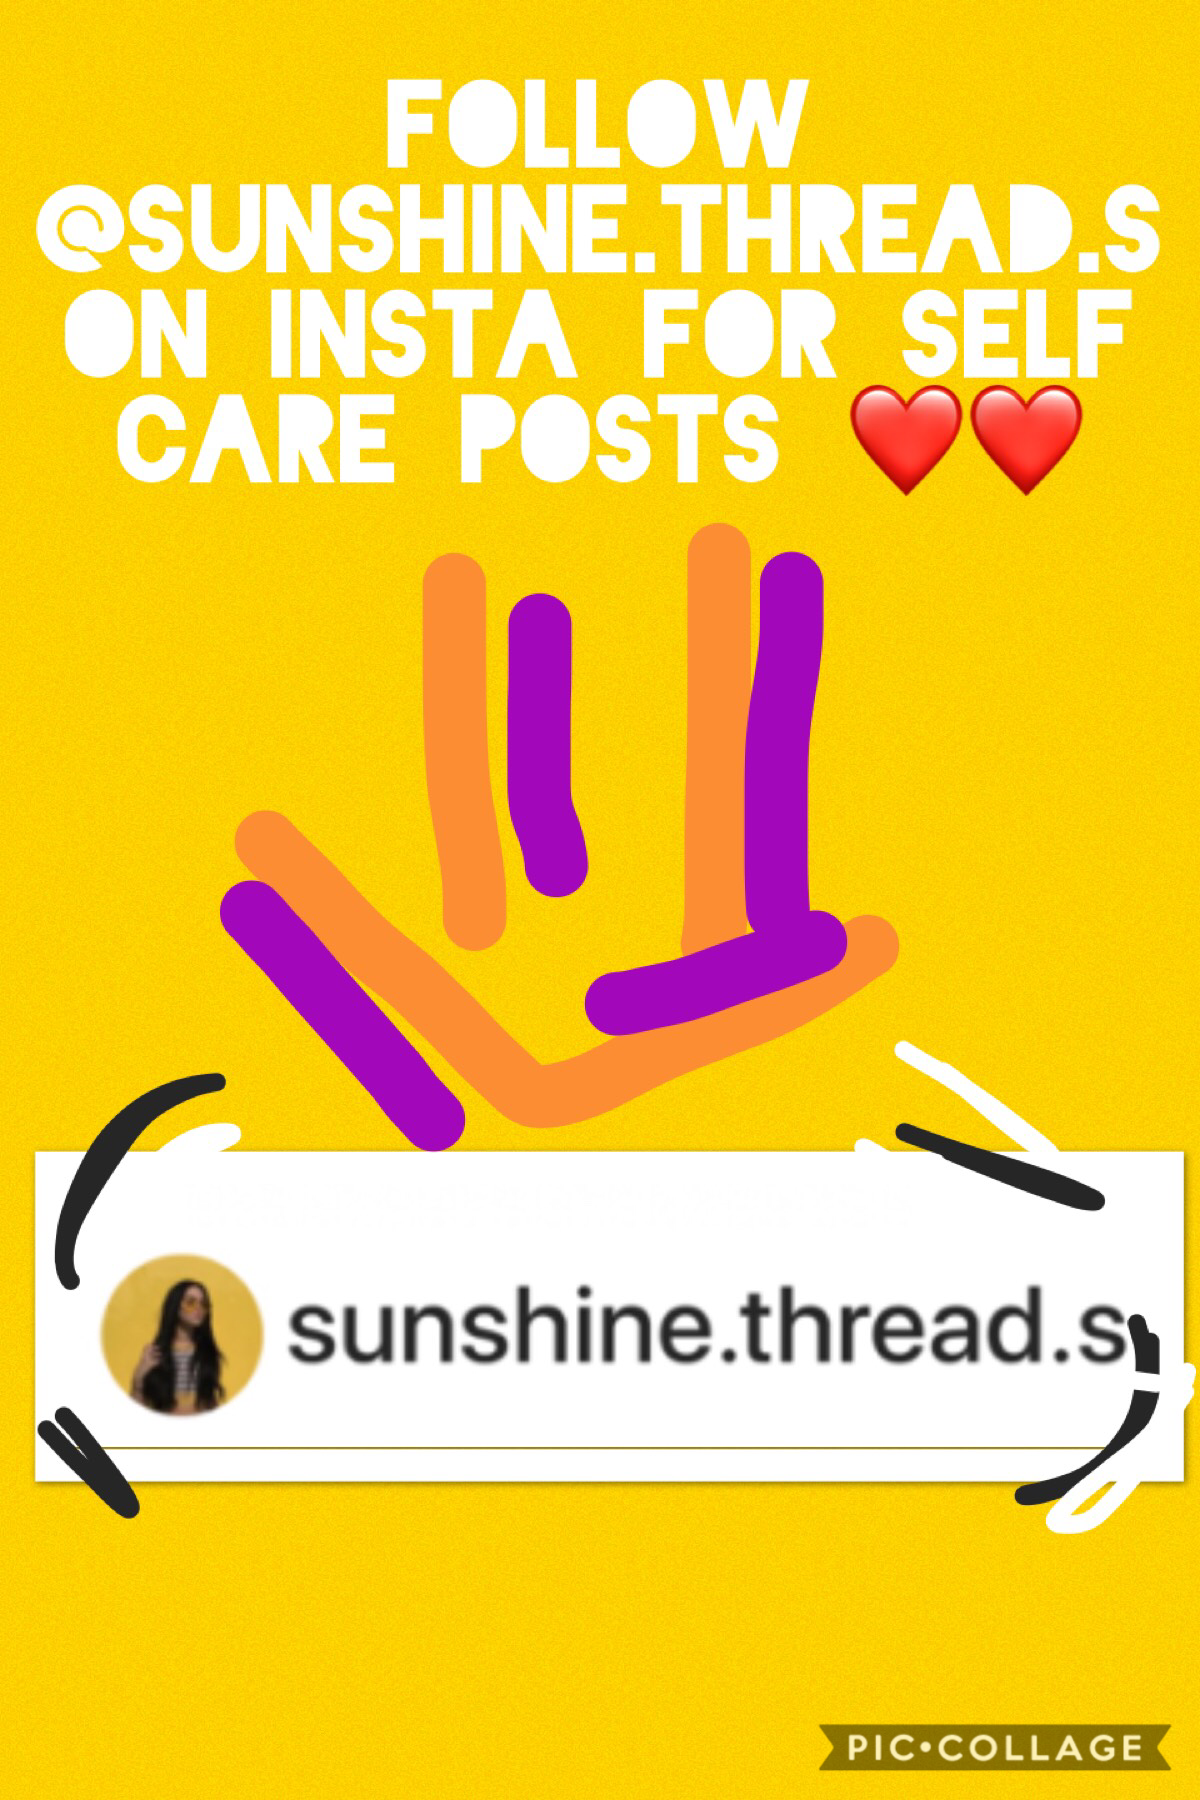 Please guys follow this amazing account on insta called sunshine.thread.s it will mean the world to person behind this amazing account thanks❤️❤️